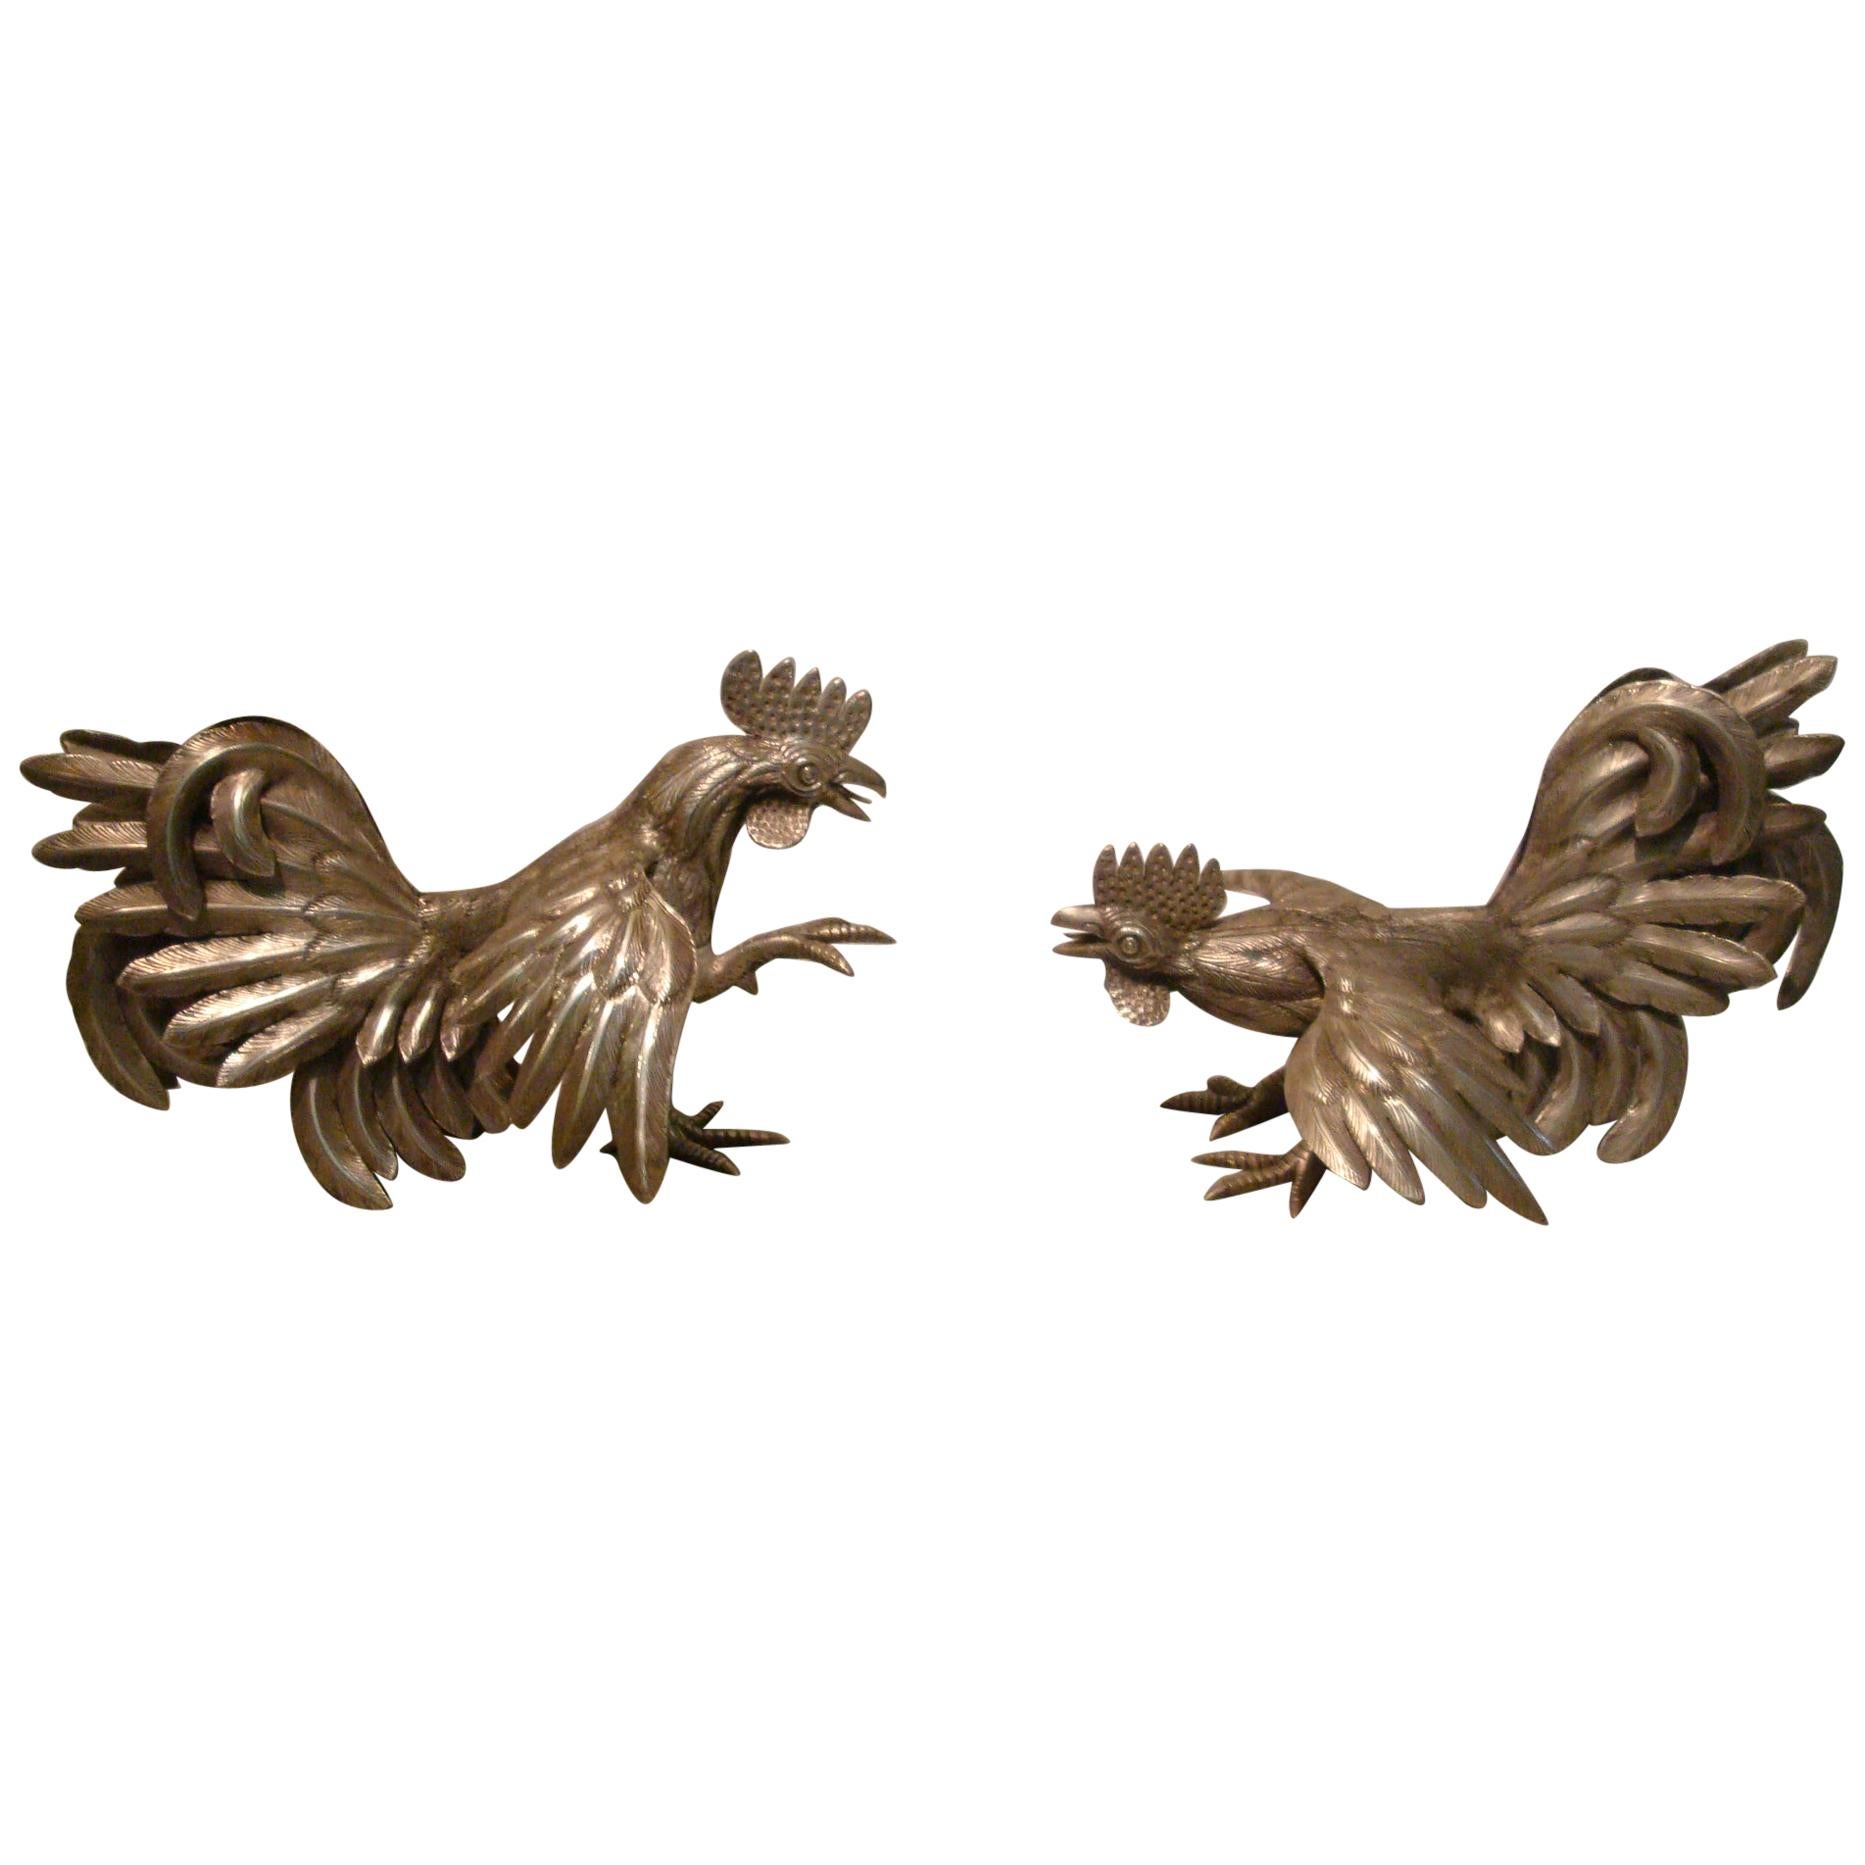 Bronze Solid Brass Baltic Amber Humor Figurine Rooster Boxing CockFight IronWork 